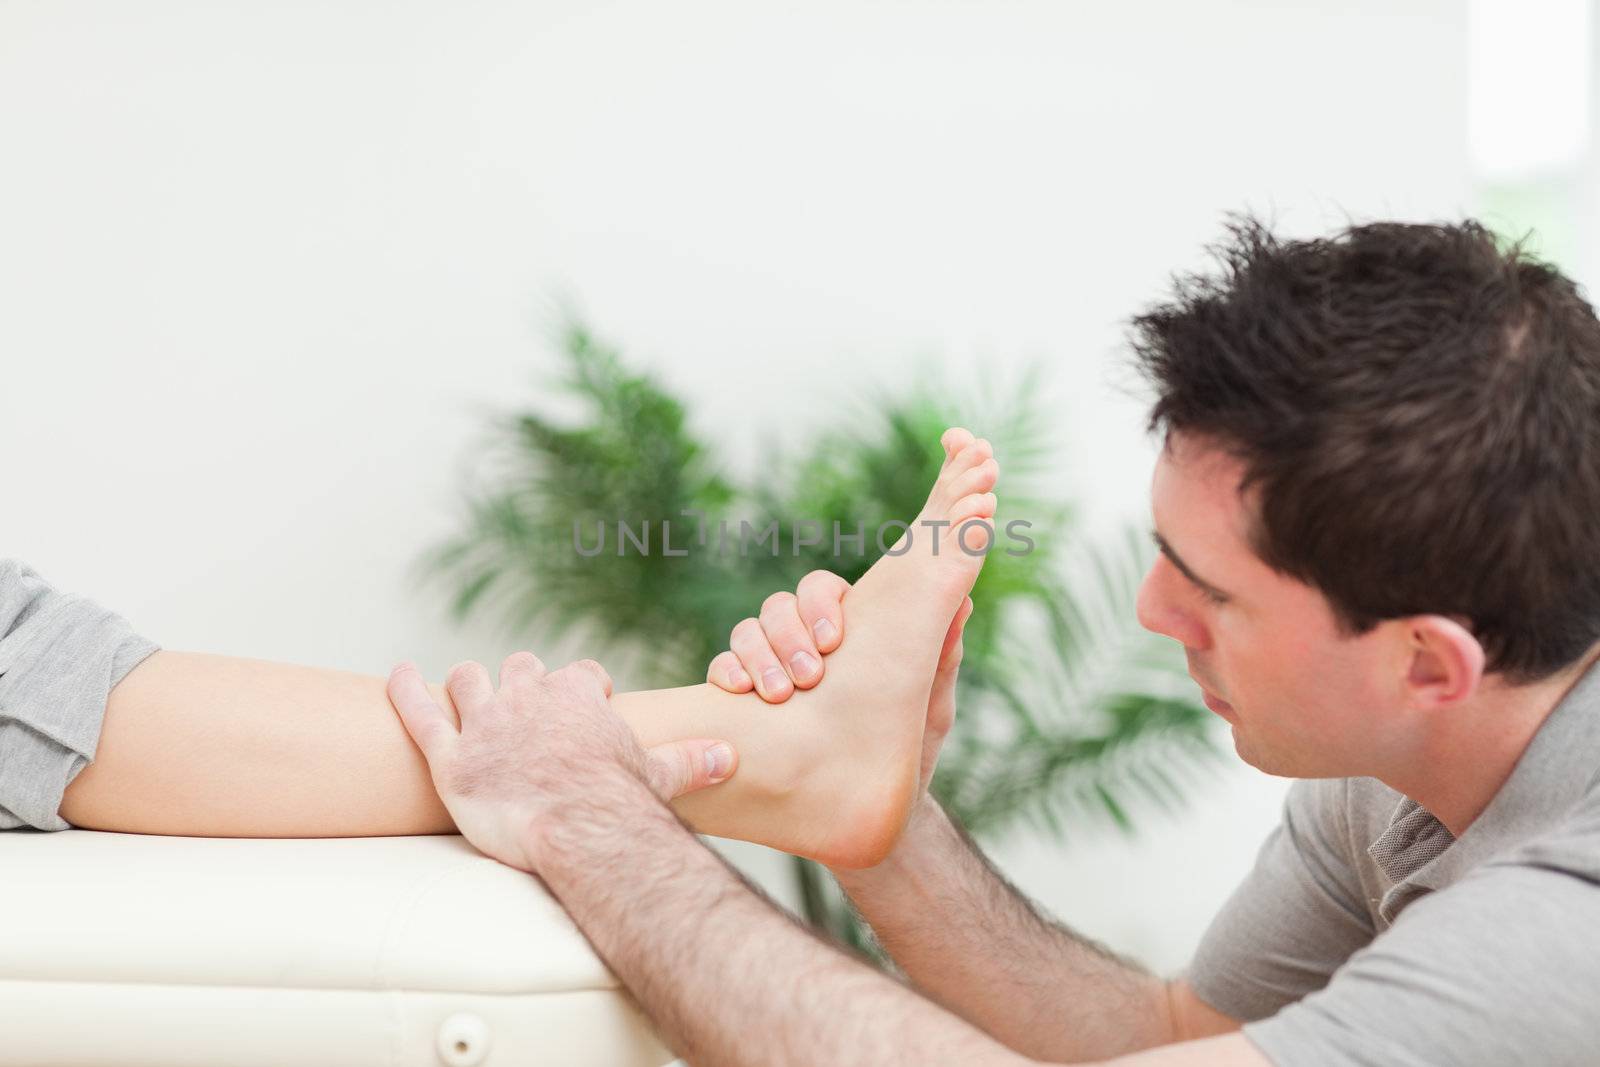 Physiotherapist sitting while massaging a foot in a room